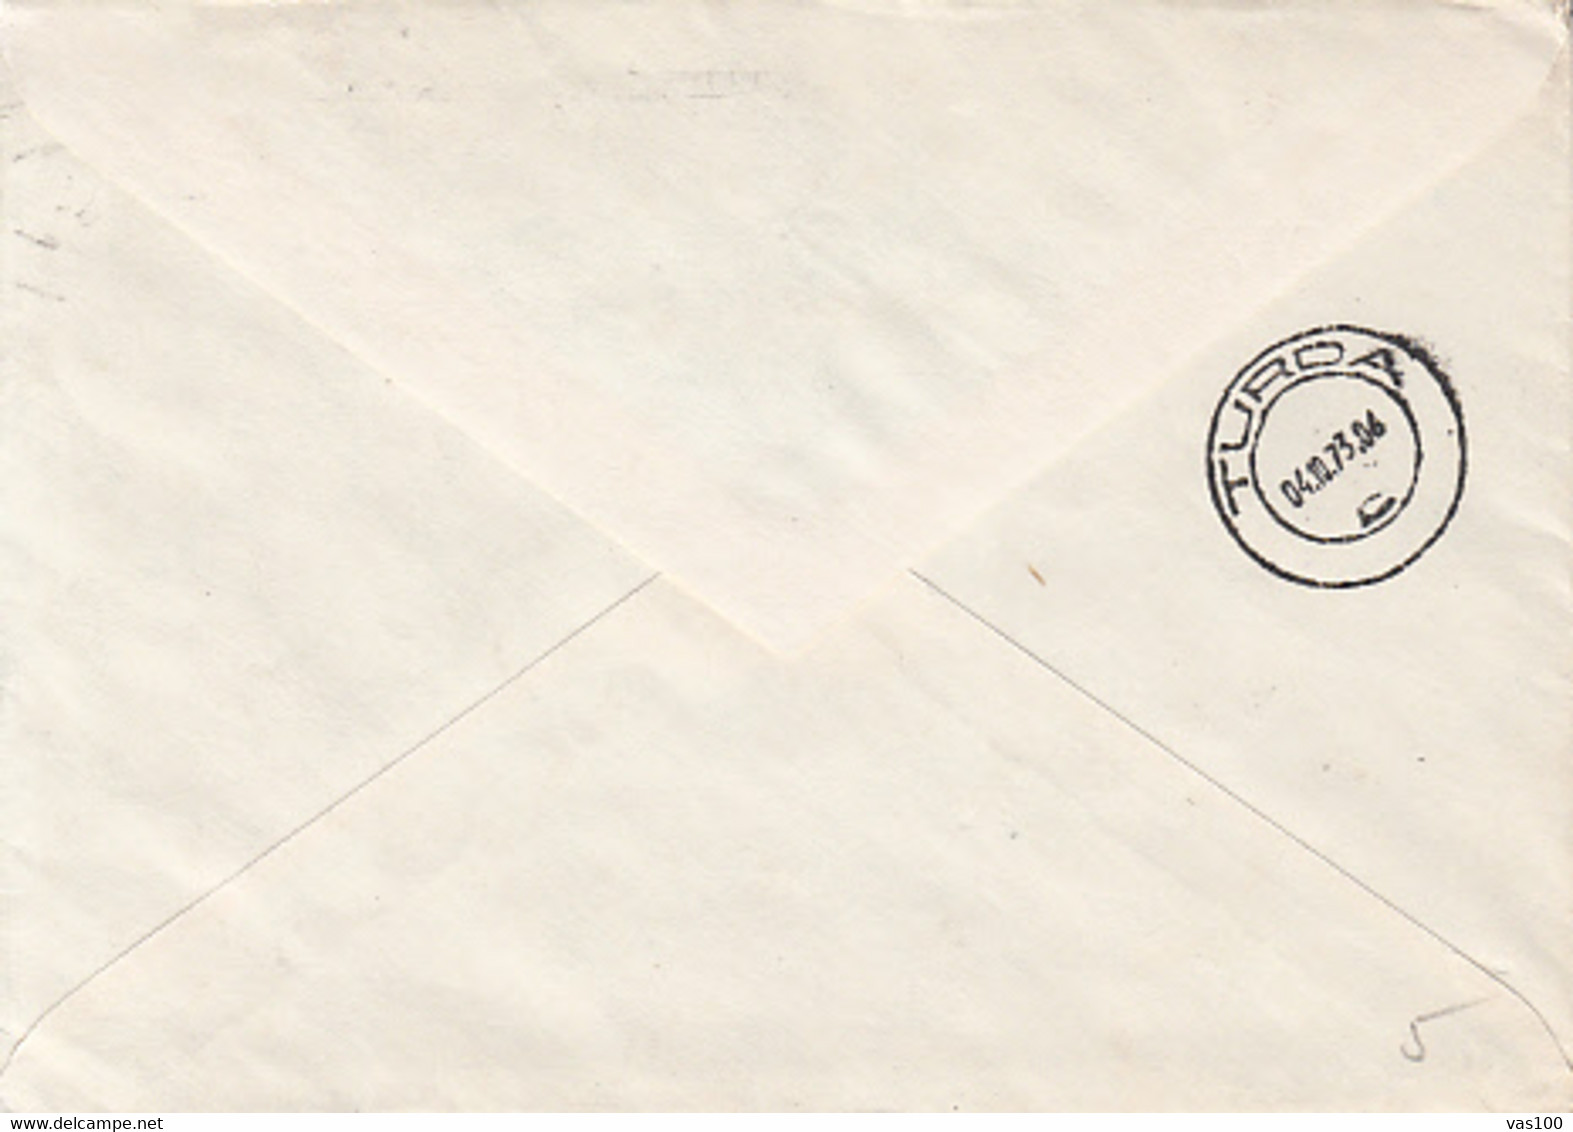 NORTH POLE, RESEARCH STATIONS, TROMSO OBSERVATORY, SPECIAL POSTMARKS ON COVER, 1973, NORWAY - Stations Scientifiques & Stations Dérivantes Arctiques